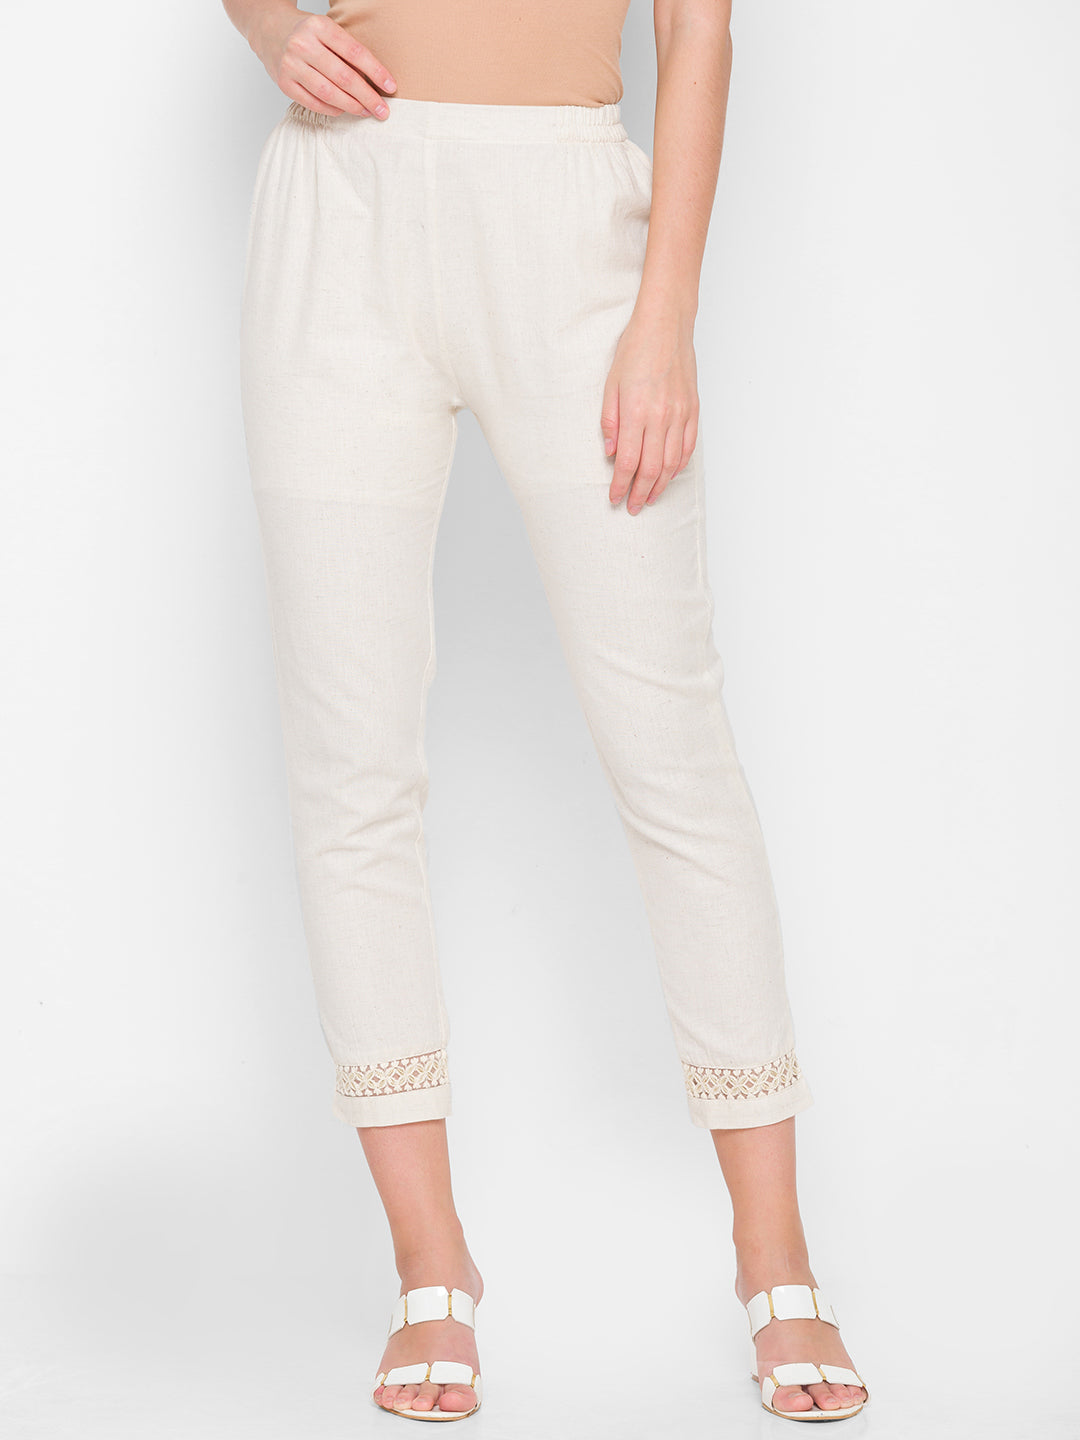 Buy Grey Trousers & Pants for Women by Marks & Spencer Online | Ajio.com